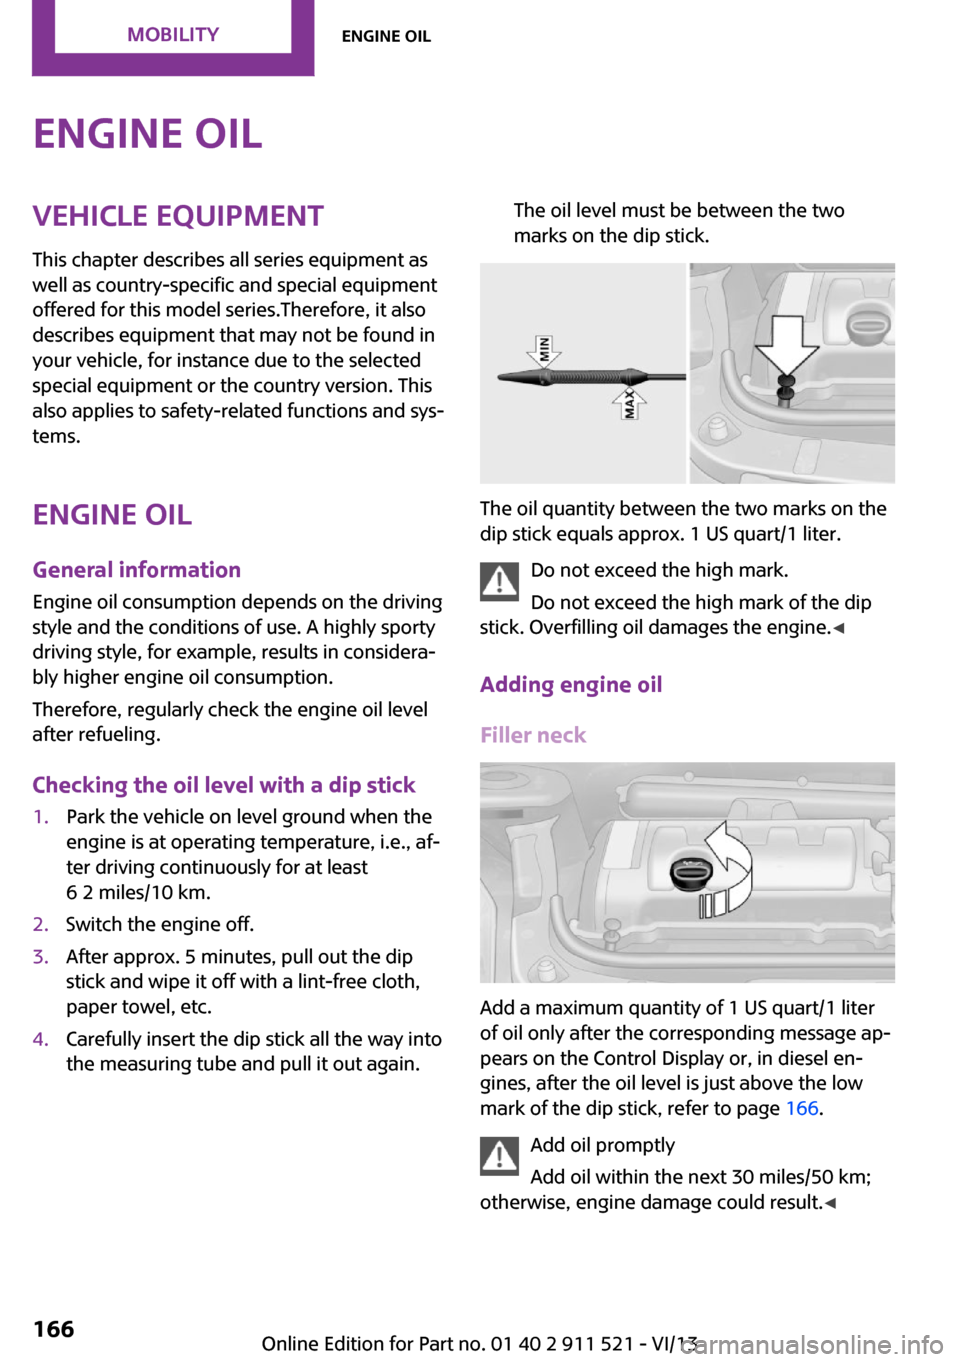 MINI Paceman 2014  Owners Manual Engine oilVehicle equipment
This chapter describes all series equipment as
well as country-specific and special equipment
offered for this model series.Therefore, it also
describes equipment that may 